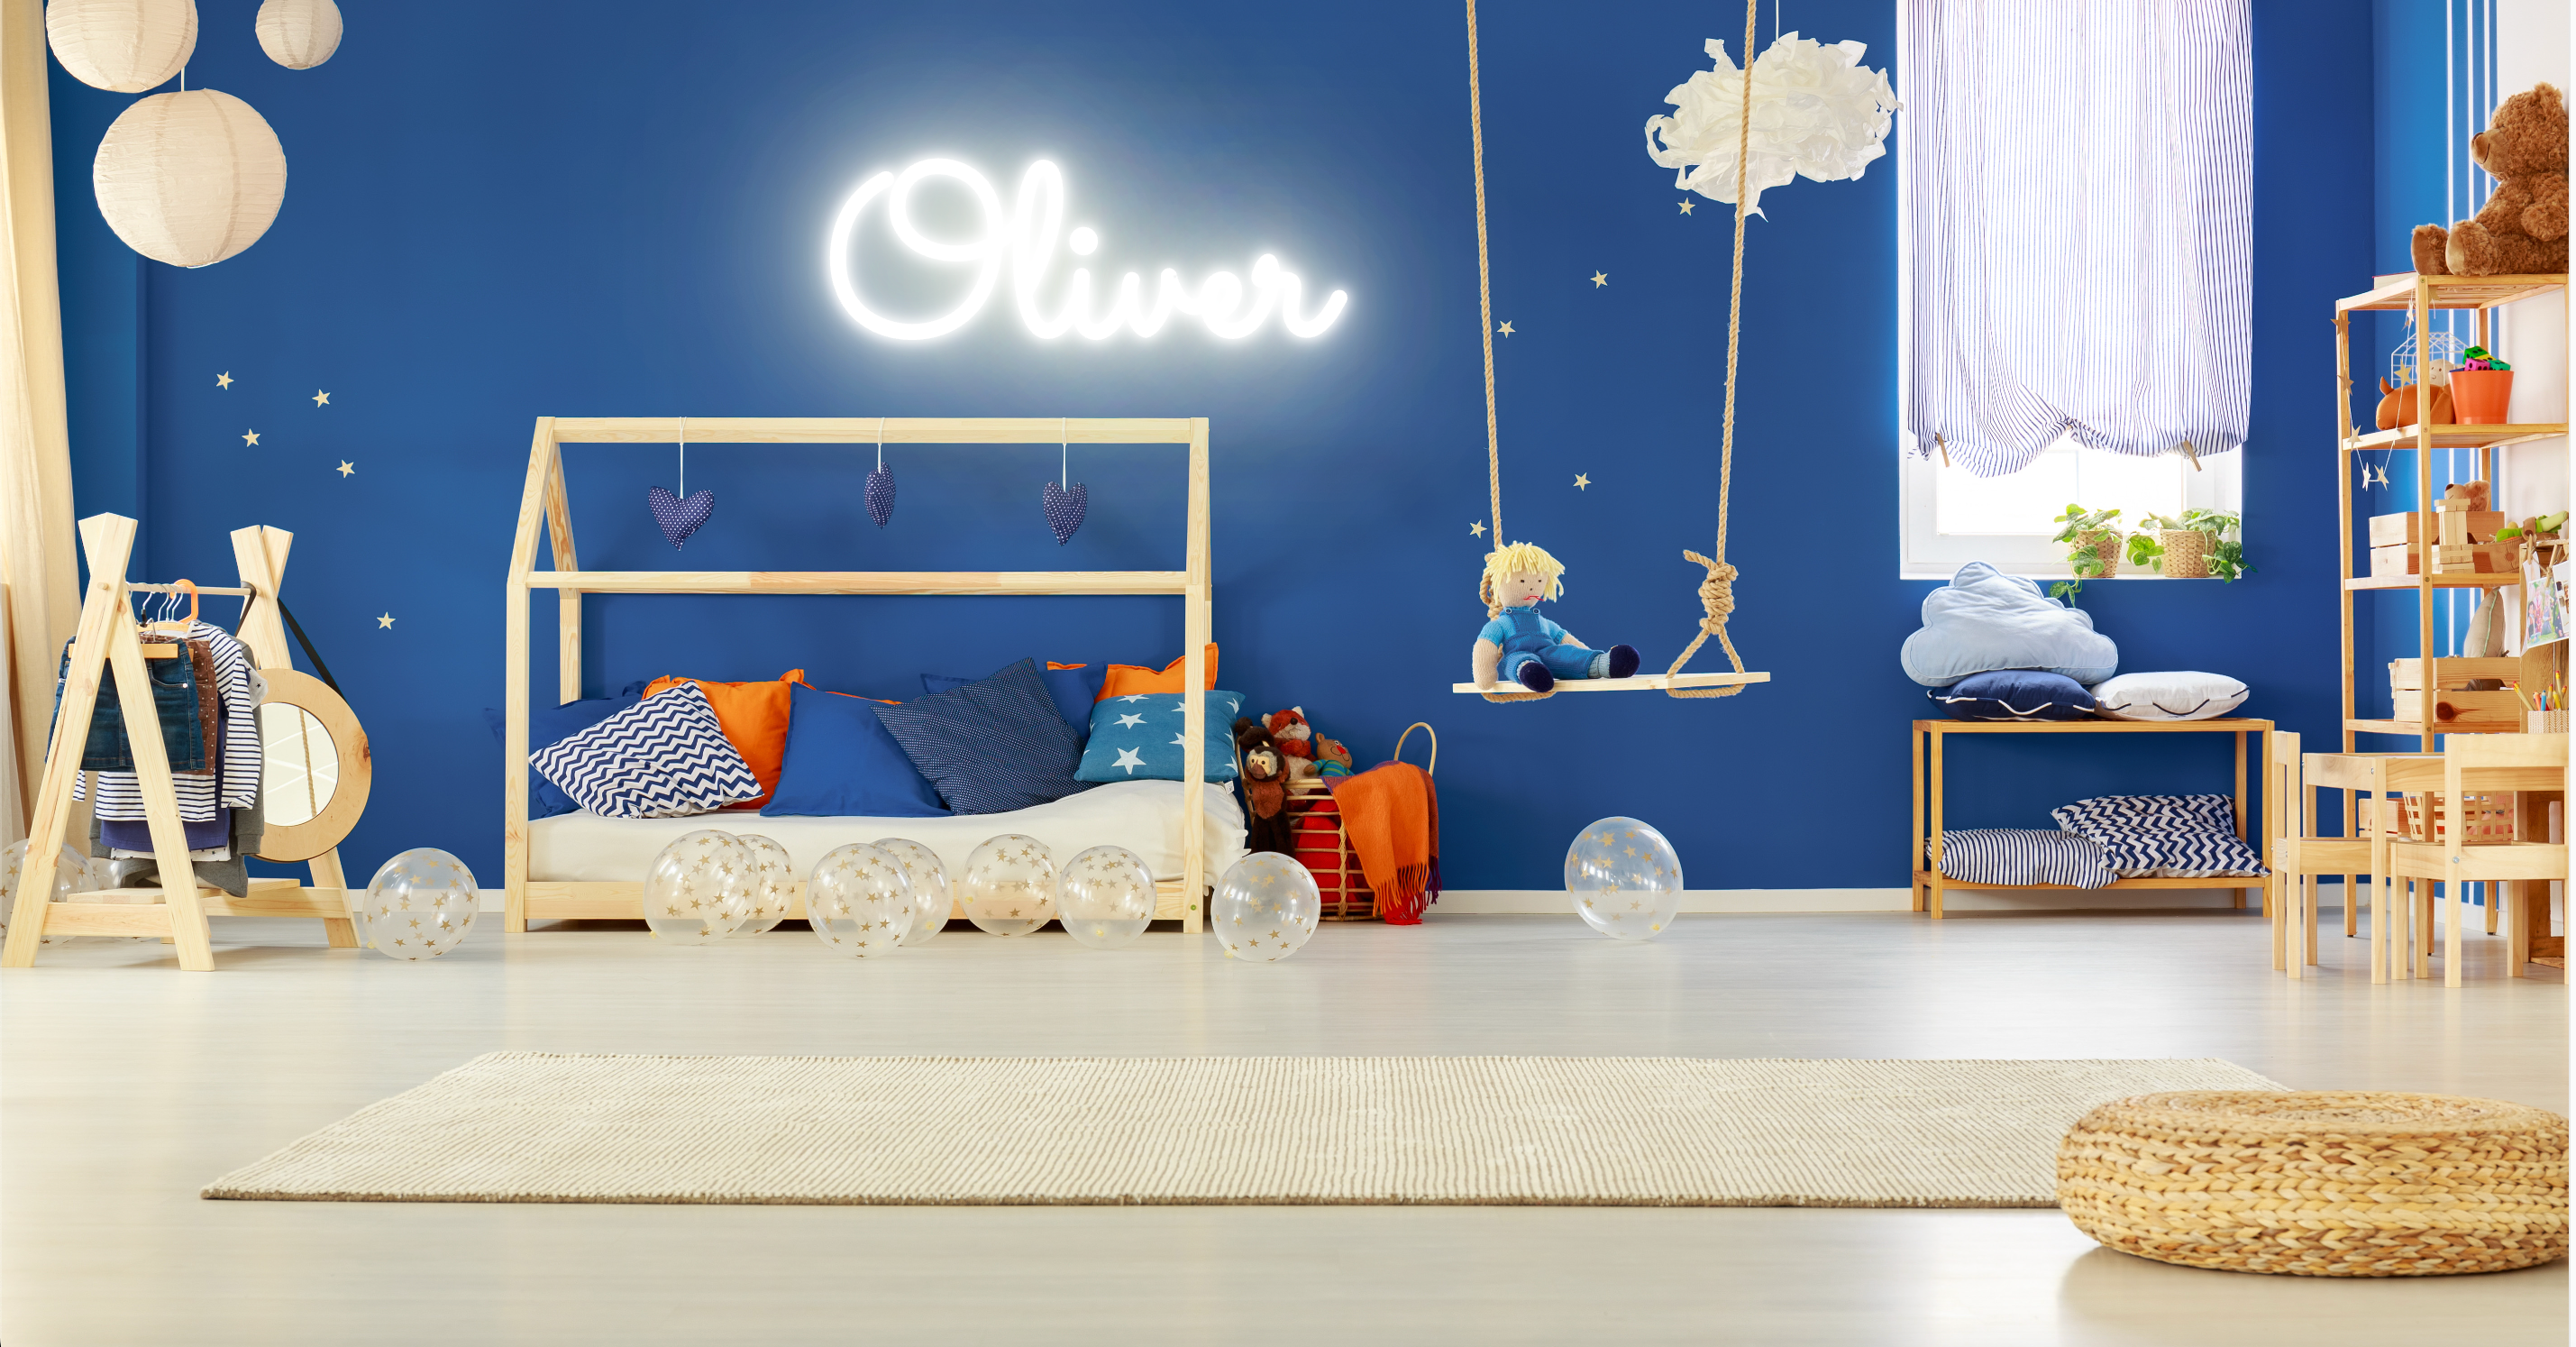 "Oliver" Baby Name LED Neon Sign